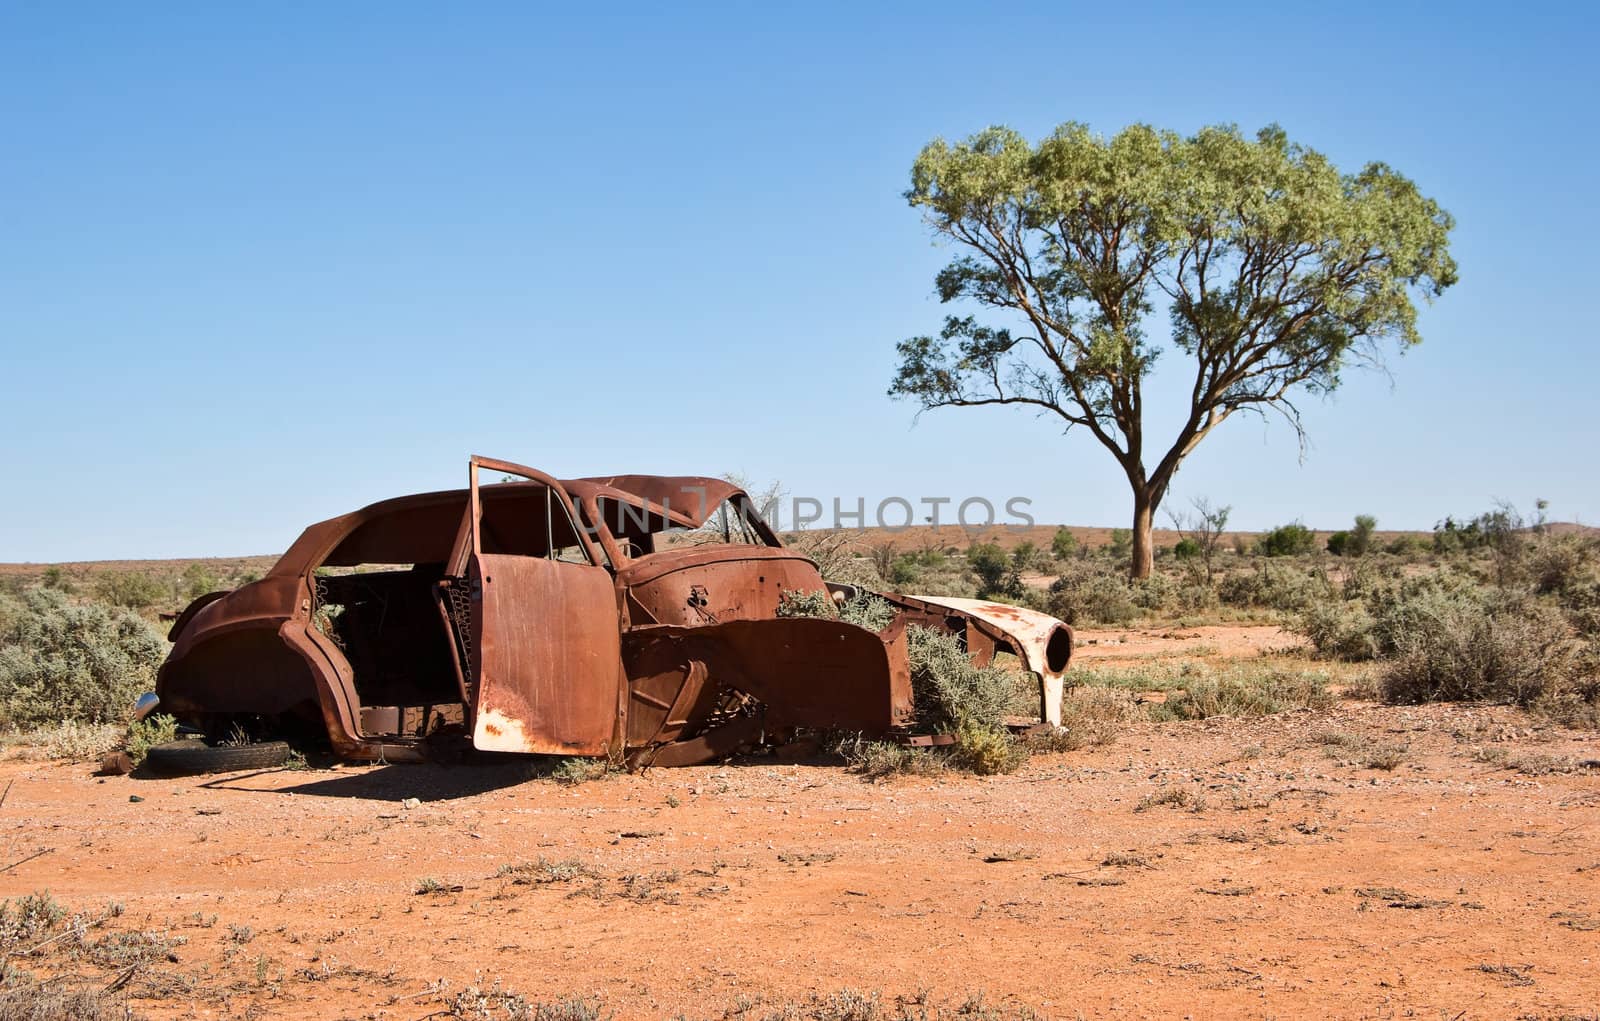 great image of an old car rusting away in the desert
